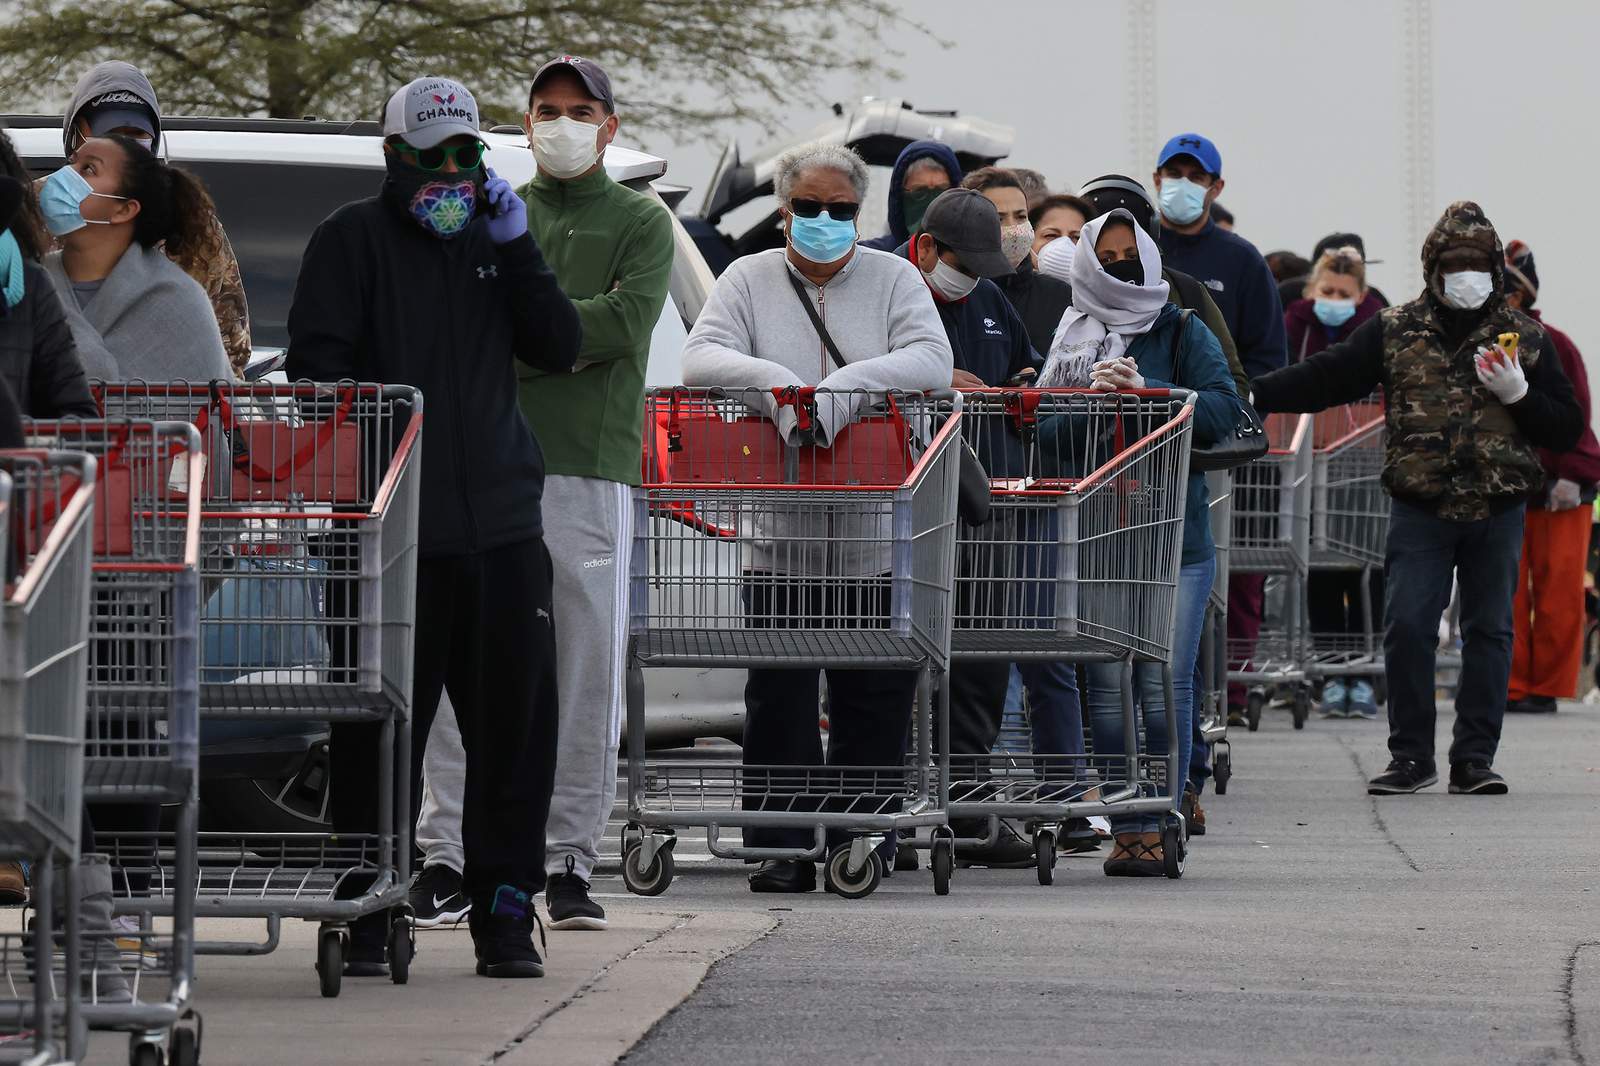 As you shop for the apocalypse, stores are paying a price